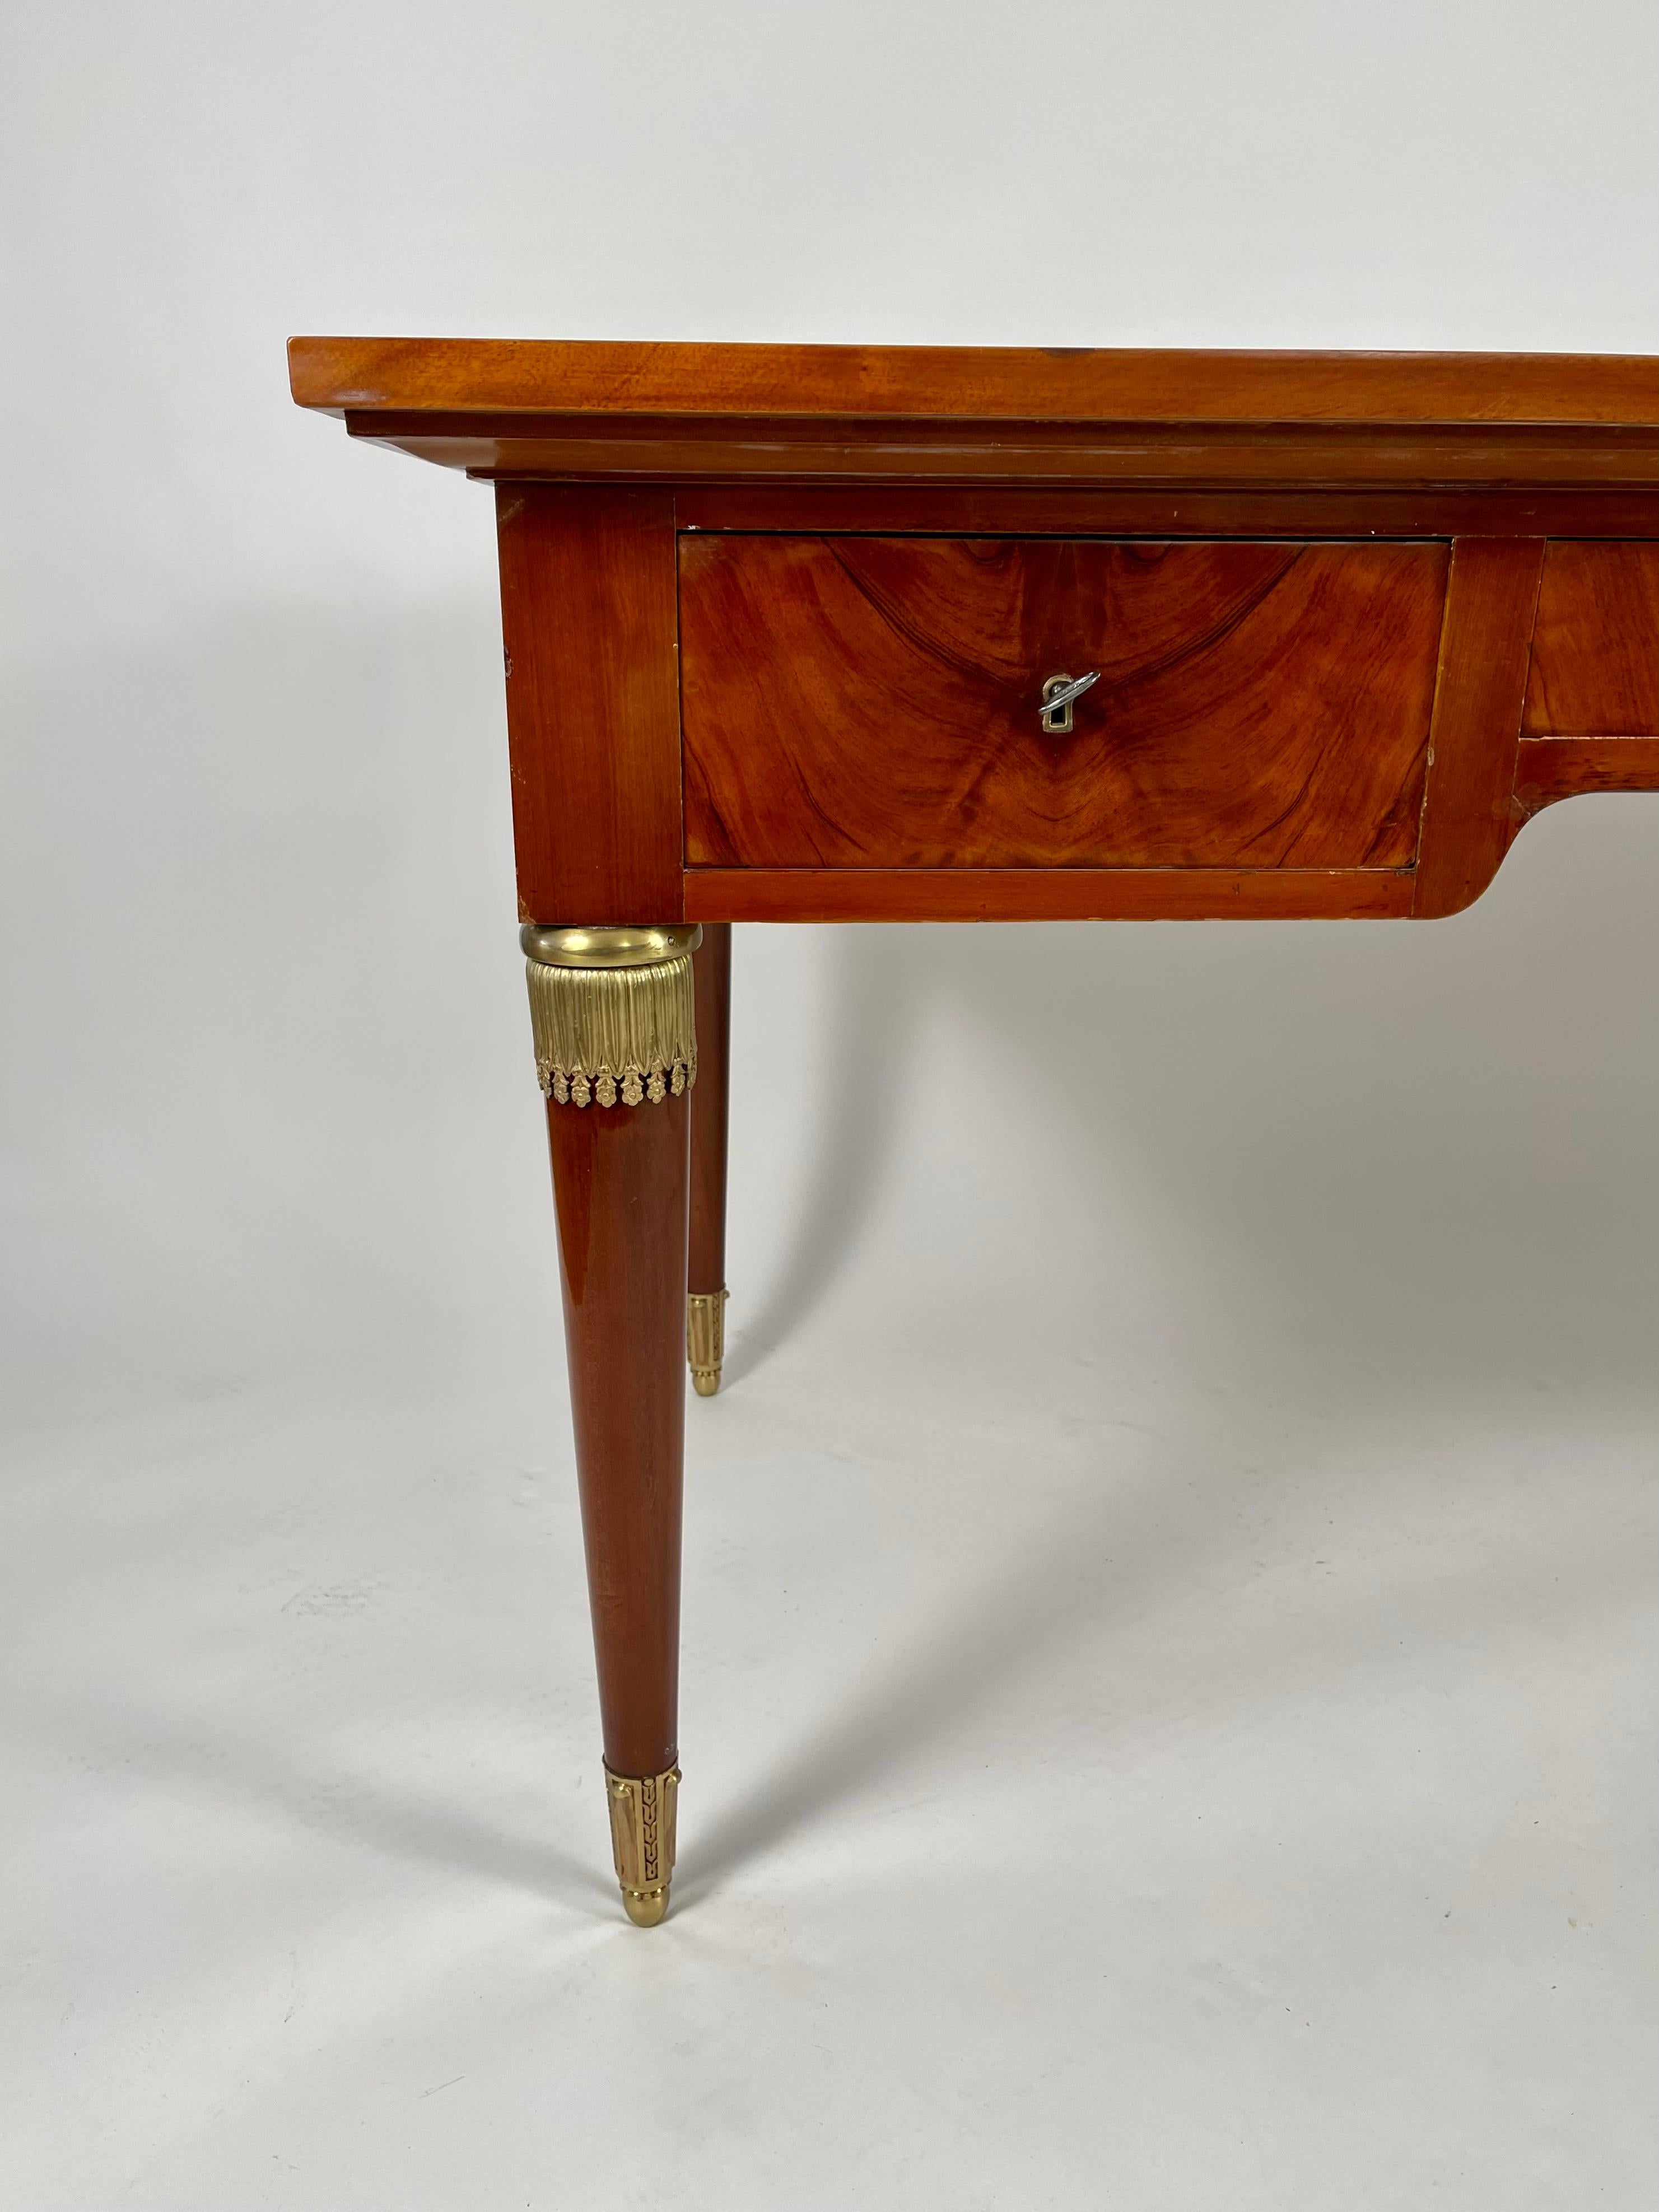 A fine quality French Empire style neoclassical desk, in richly figured mahogany with a gilt tooled leather top, over three frieze drawers supported by tapering cylindrical legs with gilt bronze mounts.
Provenance: A private collection, Boston.